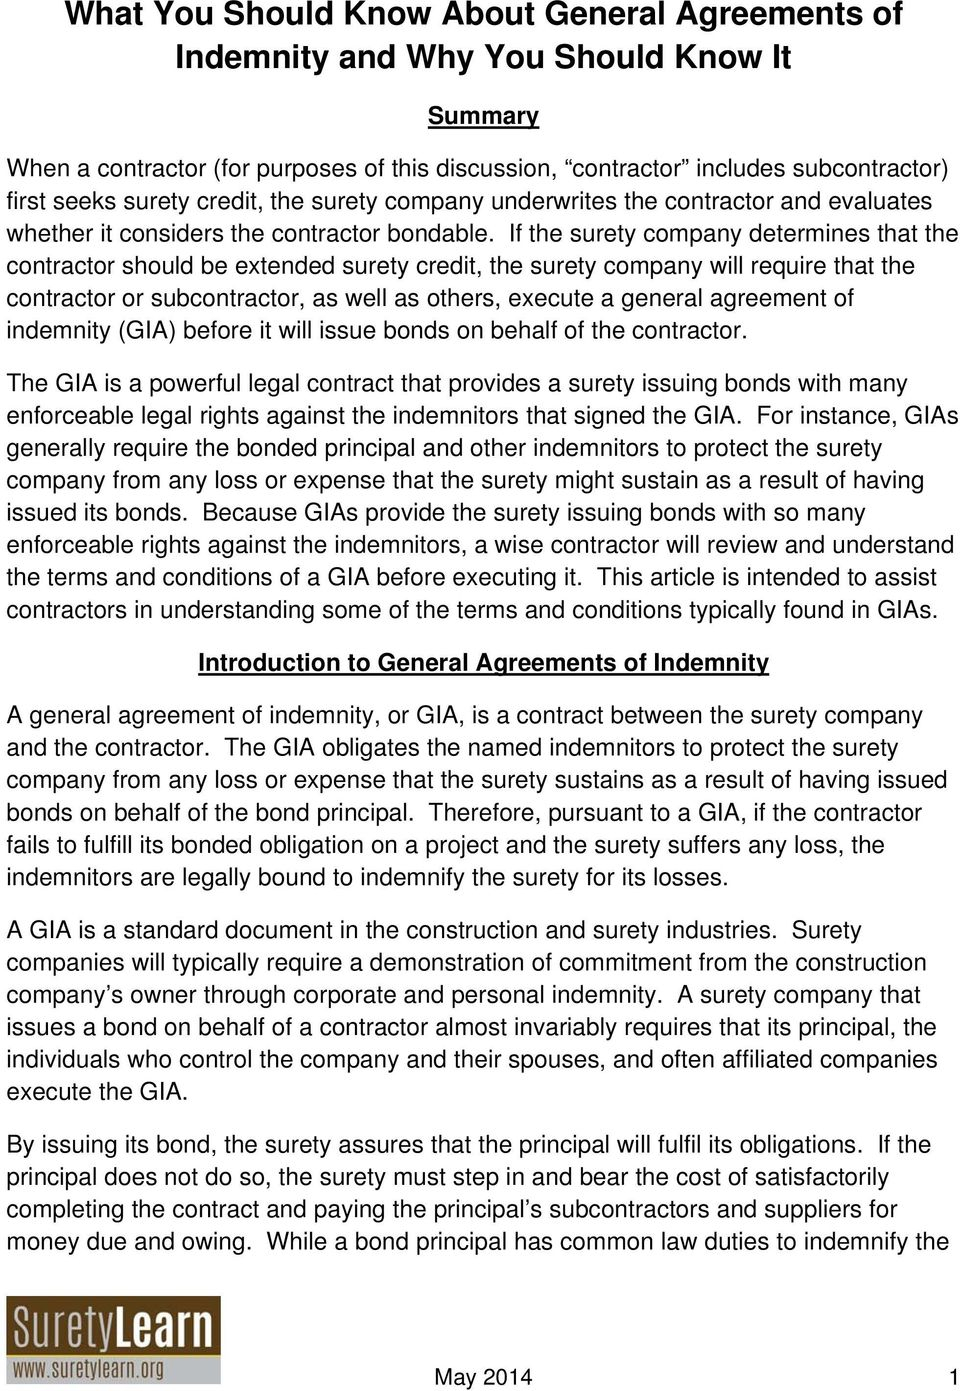 Construction Indemnity Agreement What You Should Know About General Agreements Of Indemnity And Why